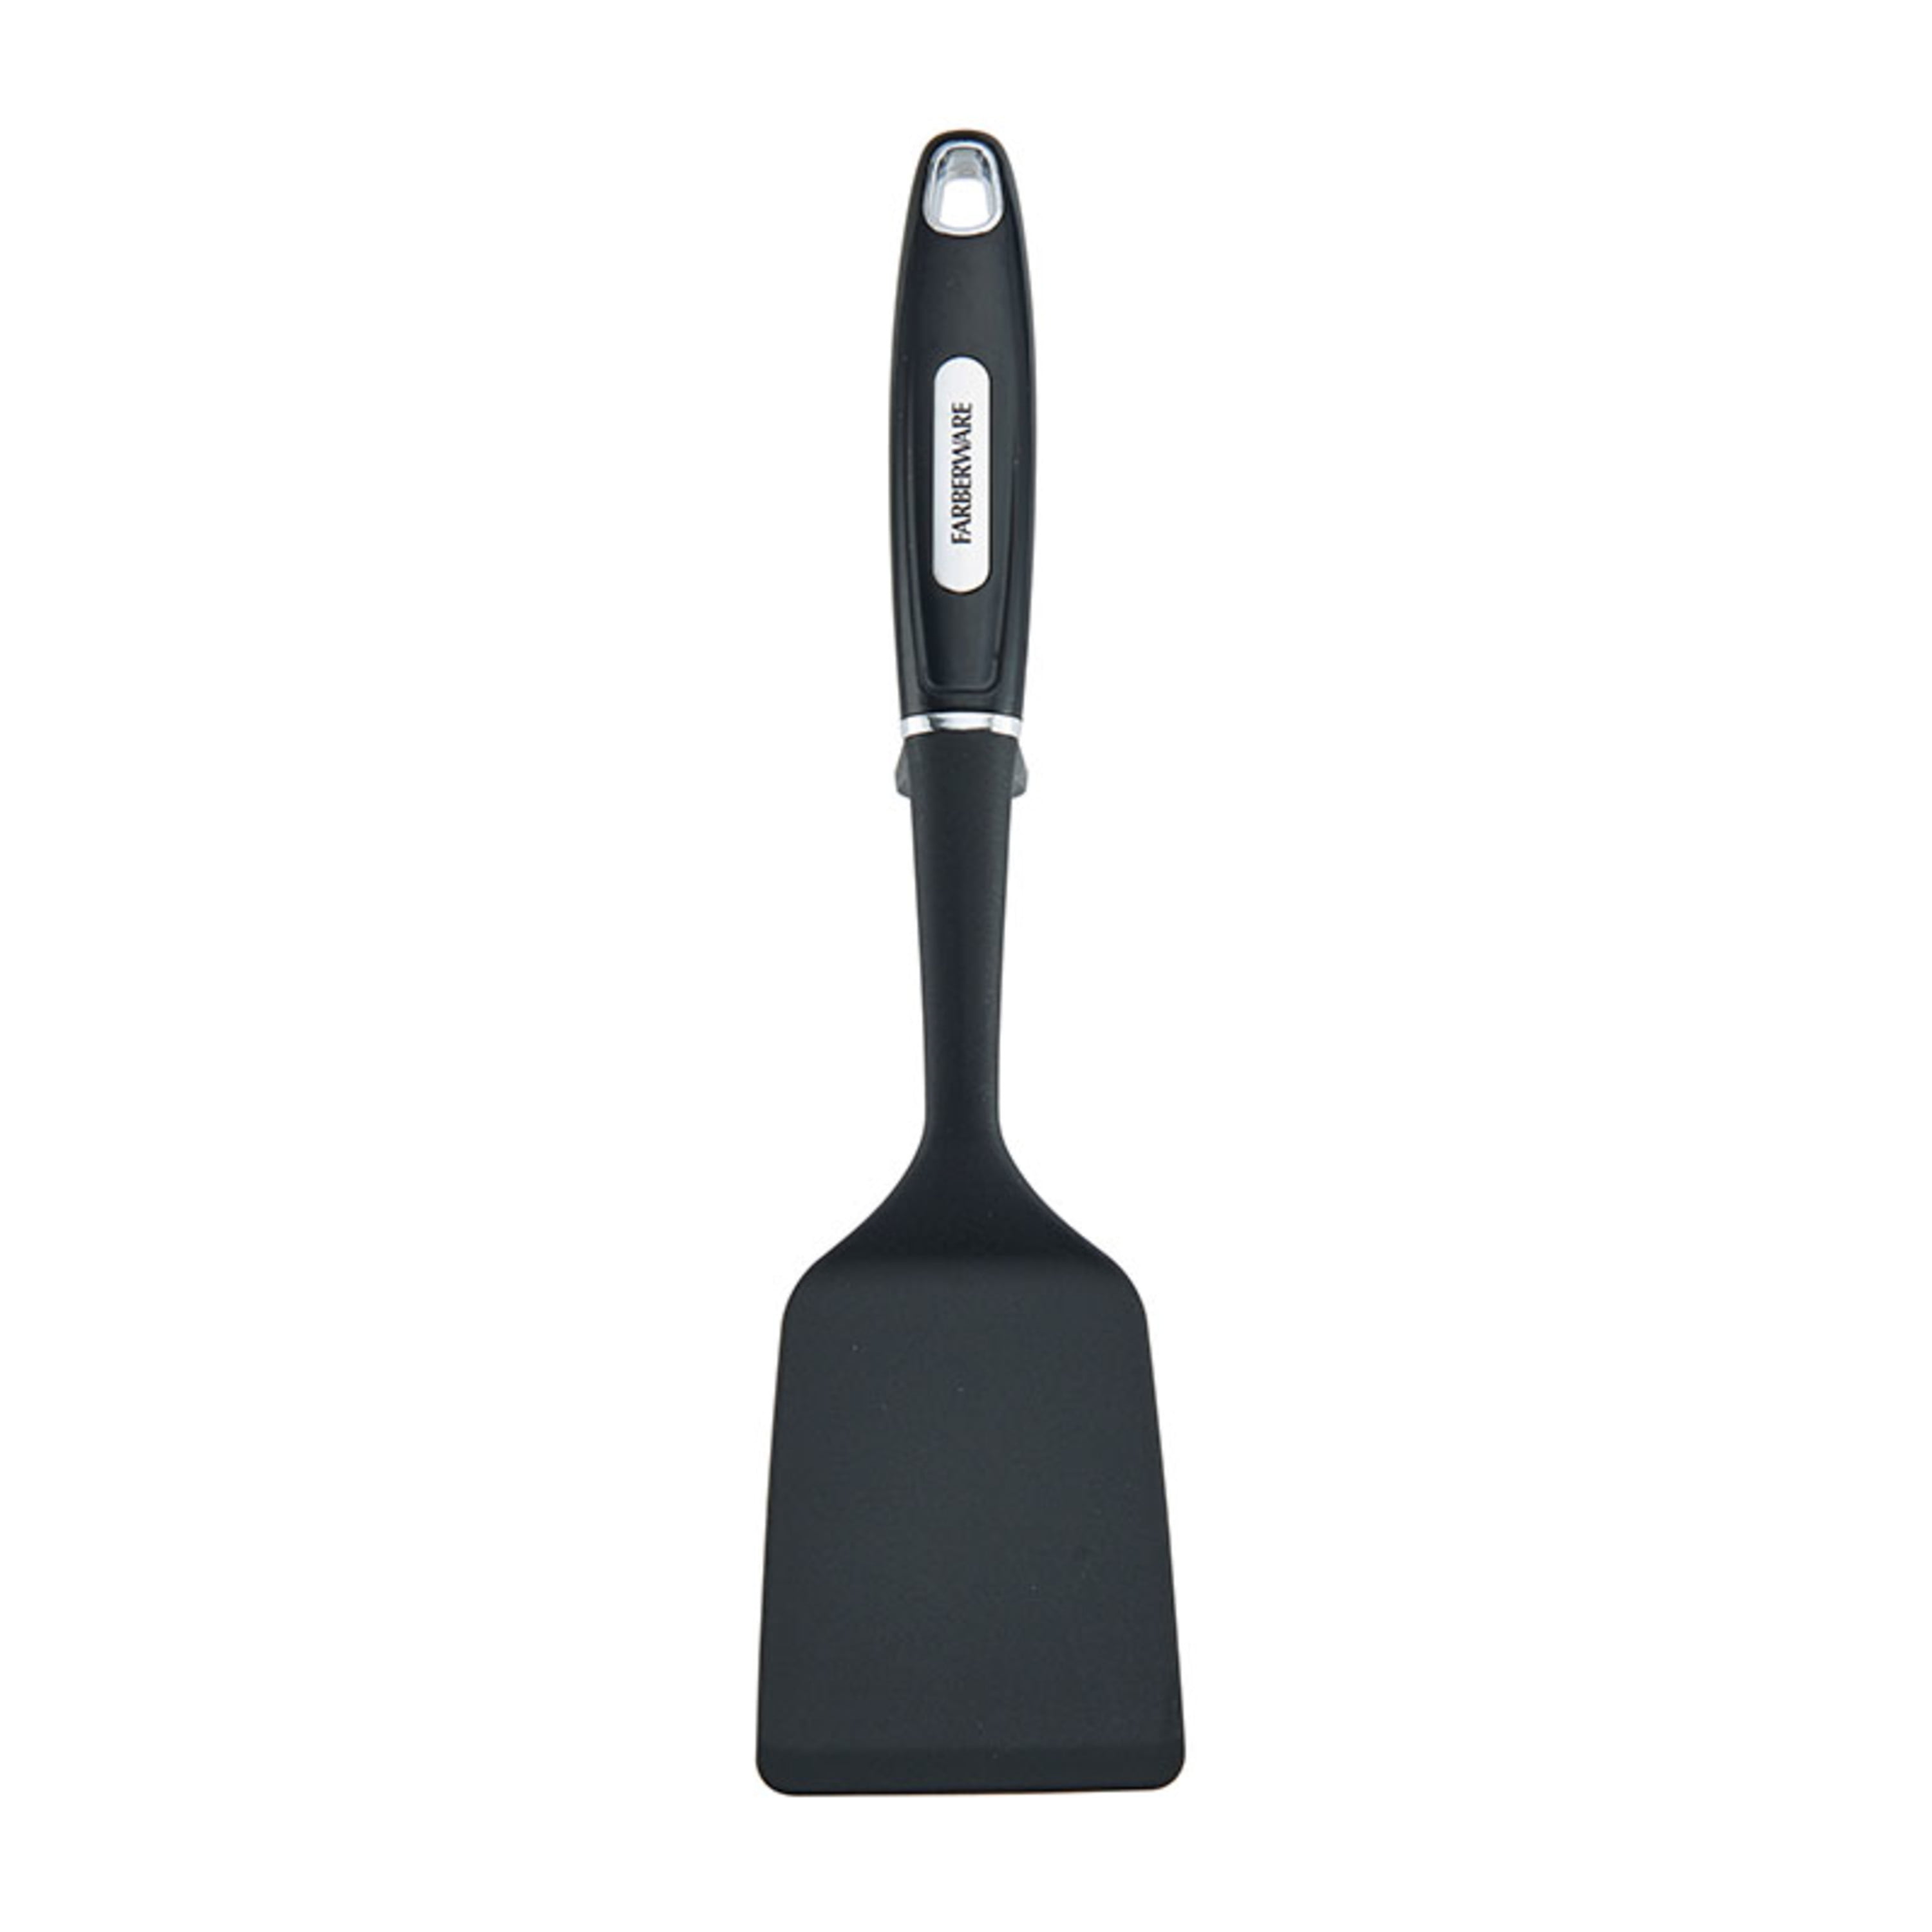 USA SELLER   SPATULA TURNER/SCRAPER FREE SHIPPING US ONLY 